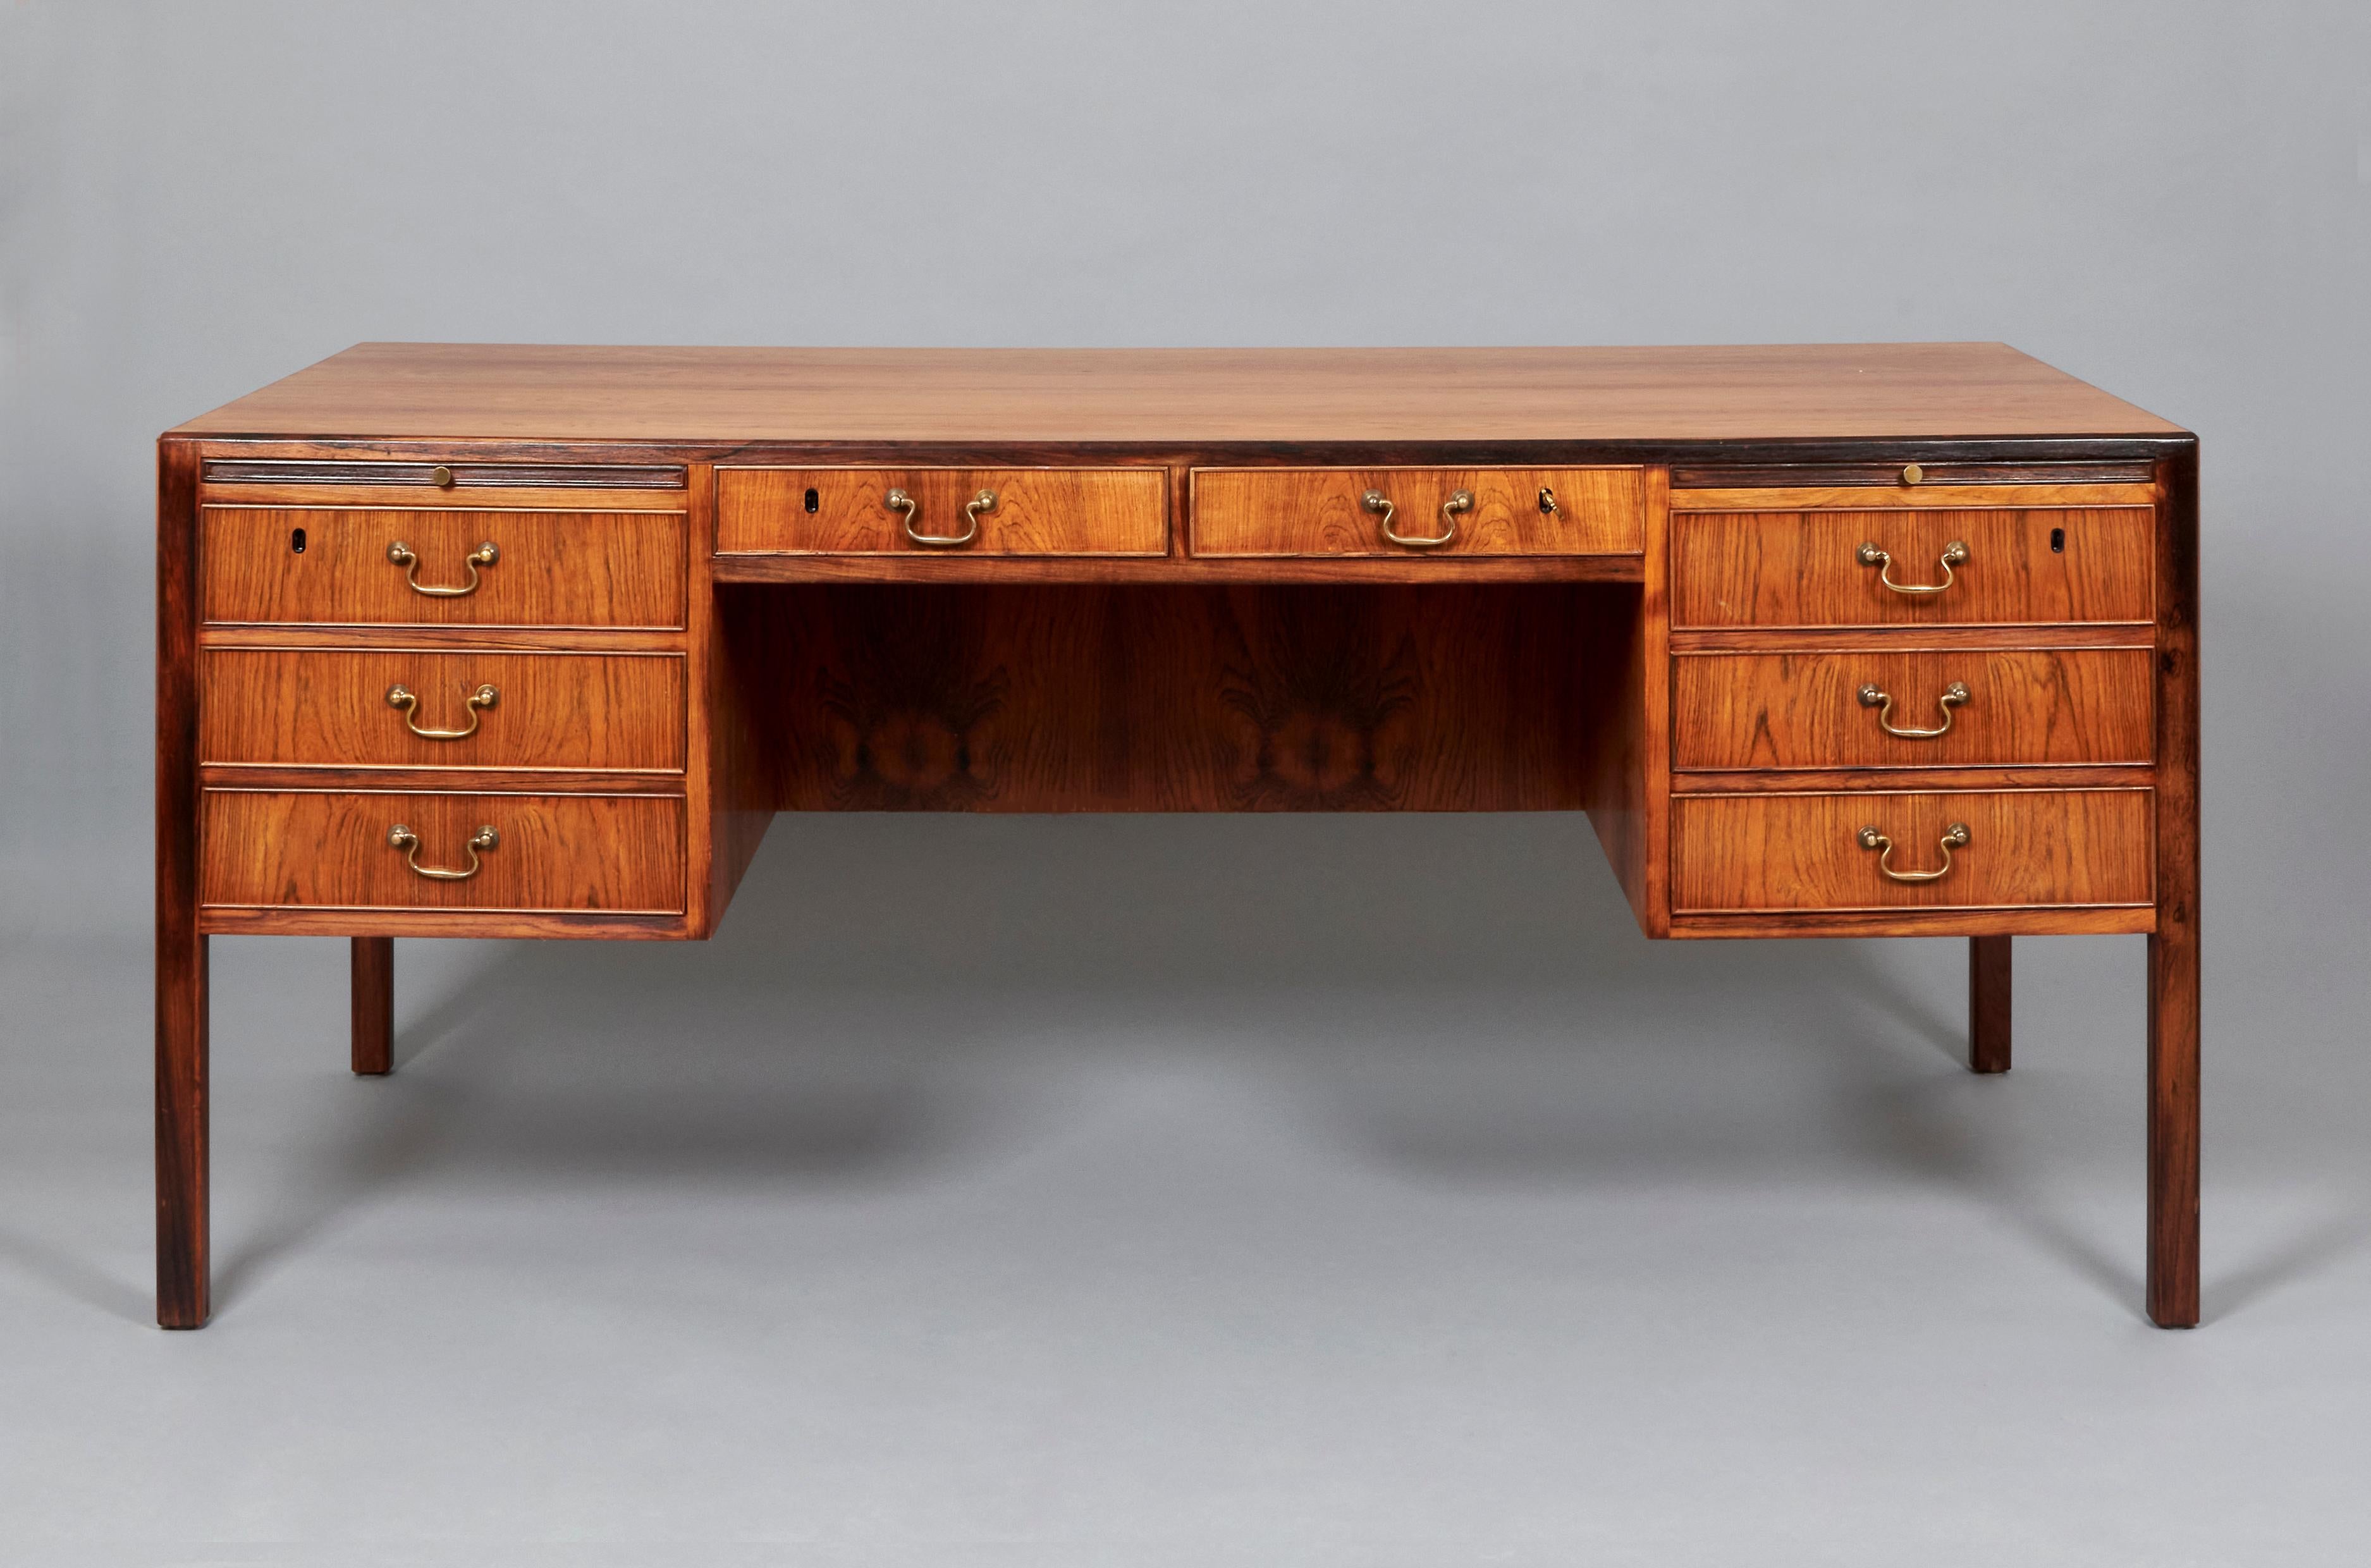 Large executive desk designed by Ole Wanscher for AJ Iversen. Denmark, 1960s. 
This Desk features a solid structure and and interesting set of drawers and storage space, including two small display shelves at the front. 
Ole Wanscher was a key